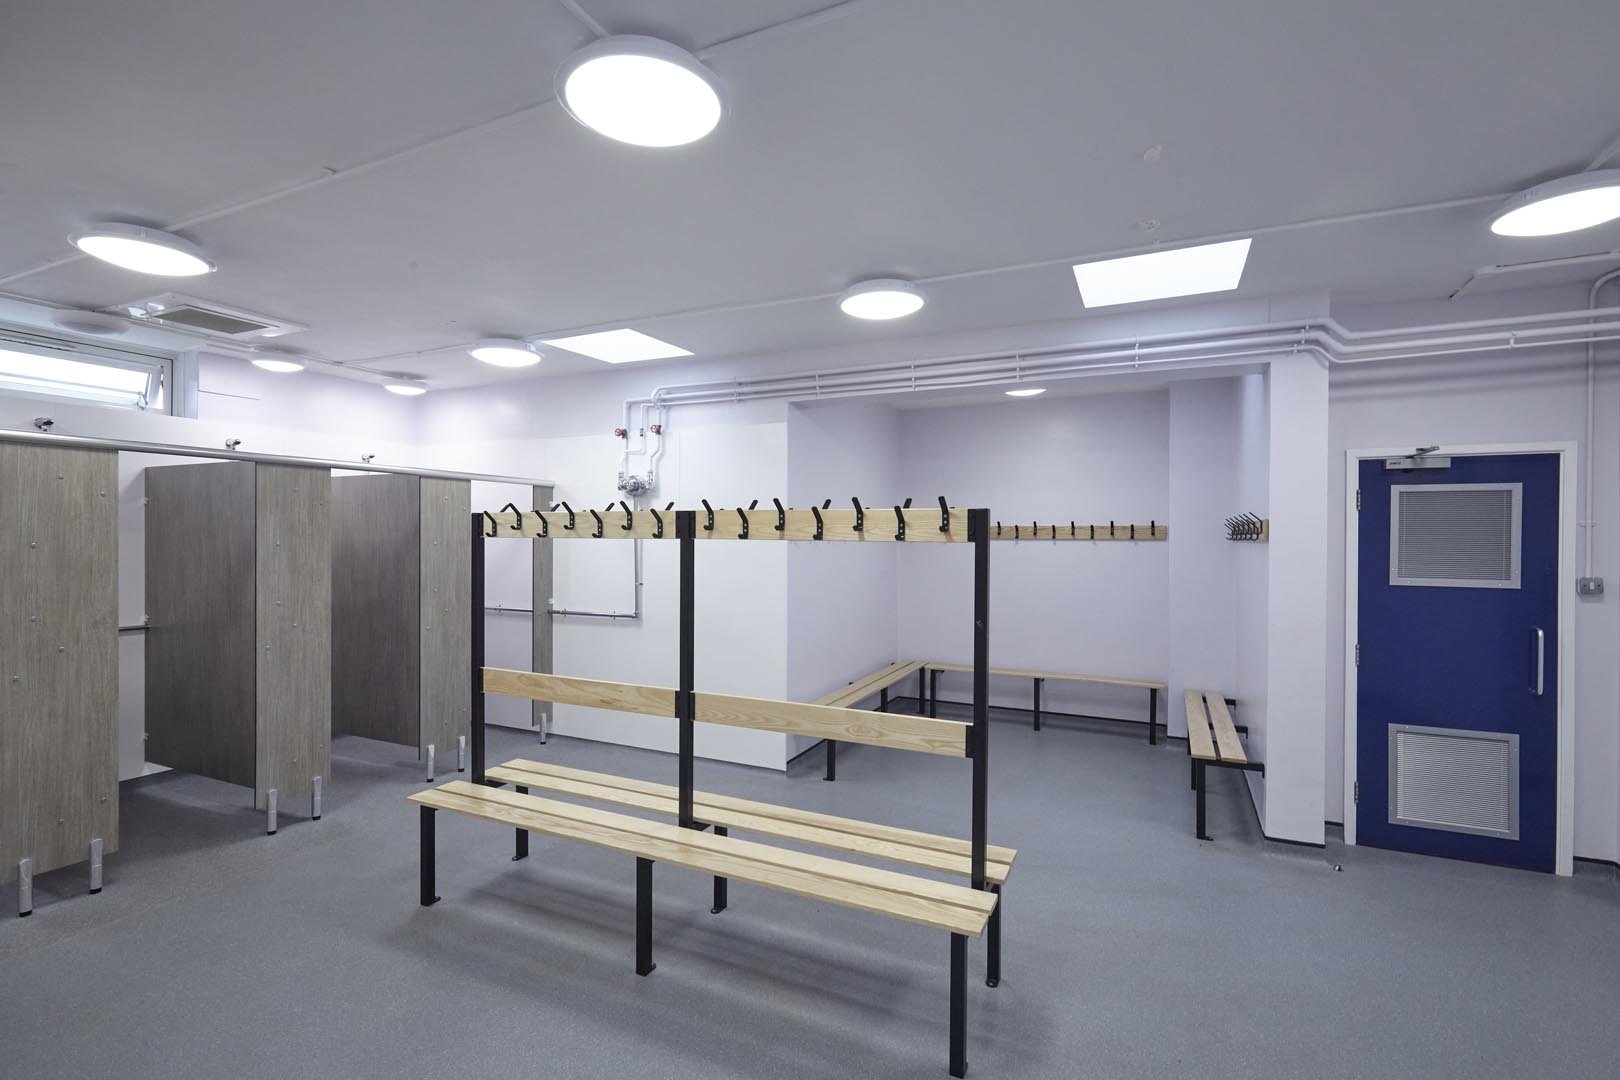 churchmead school changing rooms with showers and benching.jpg